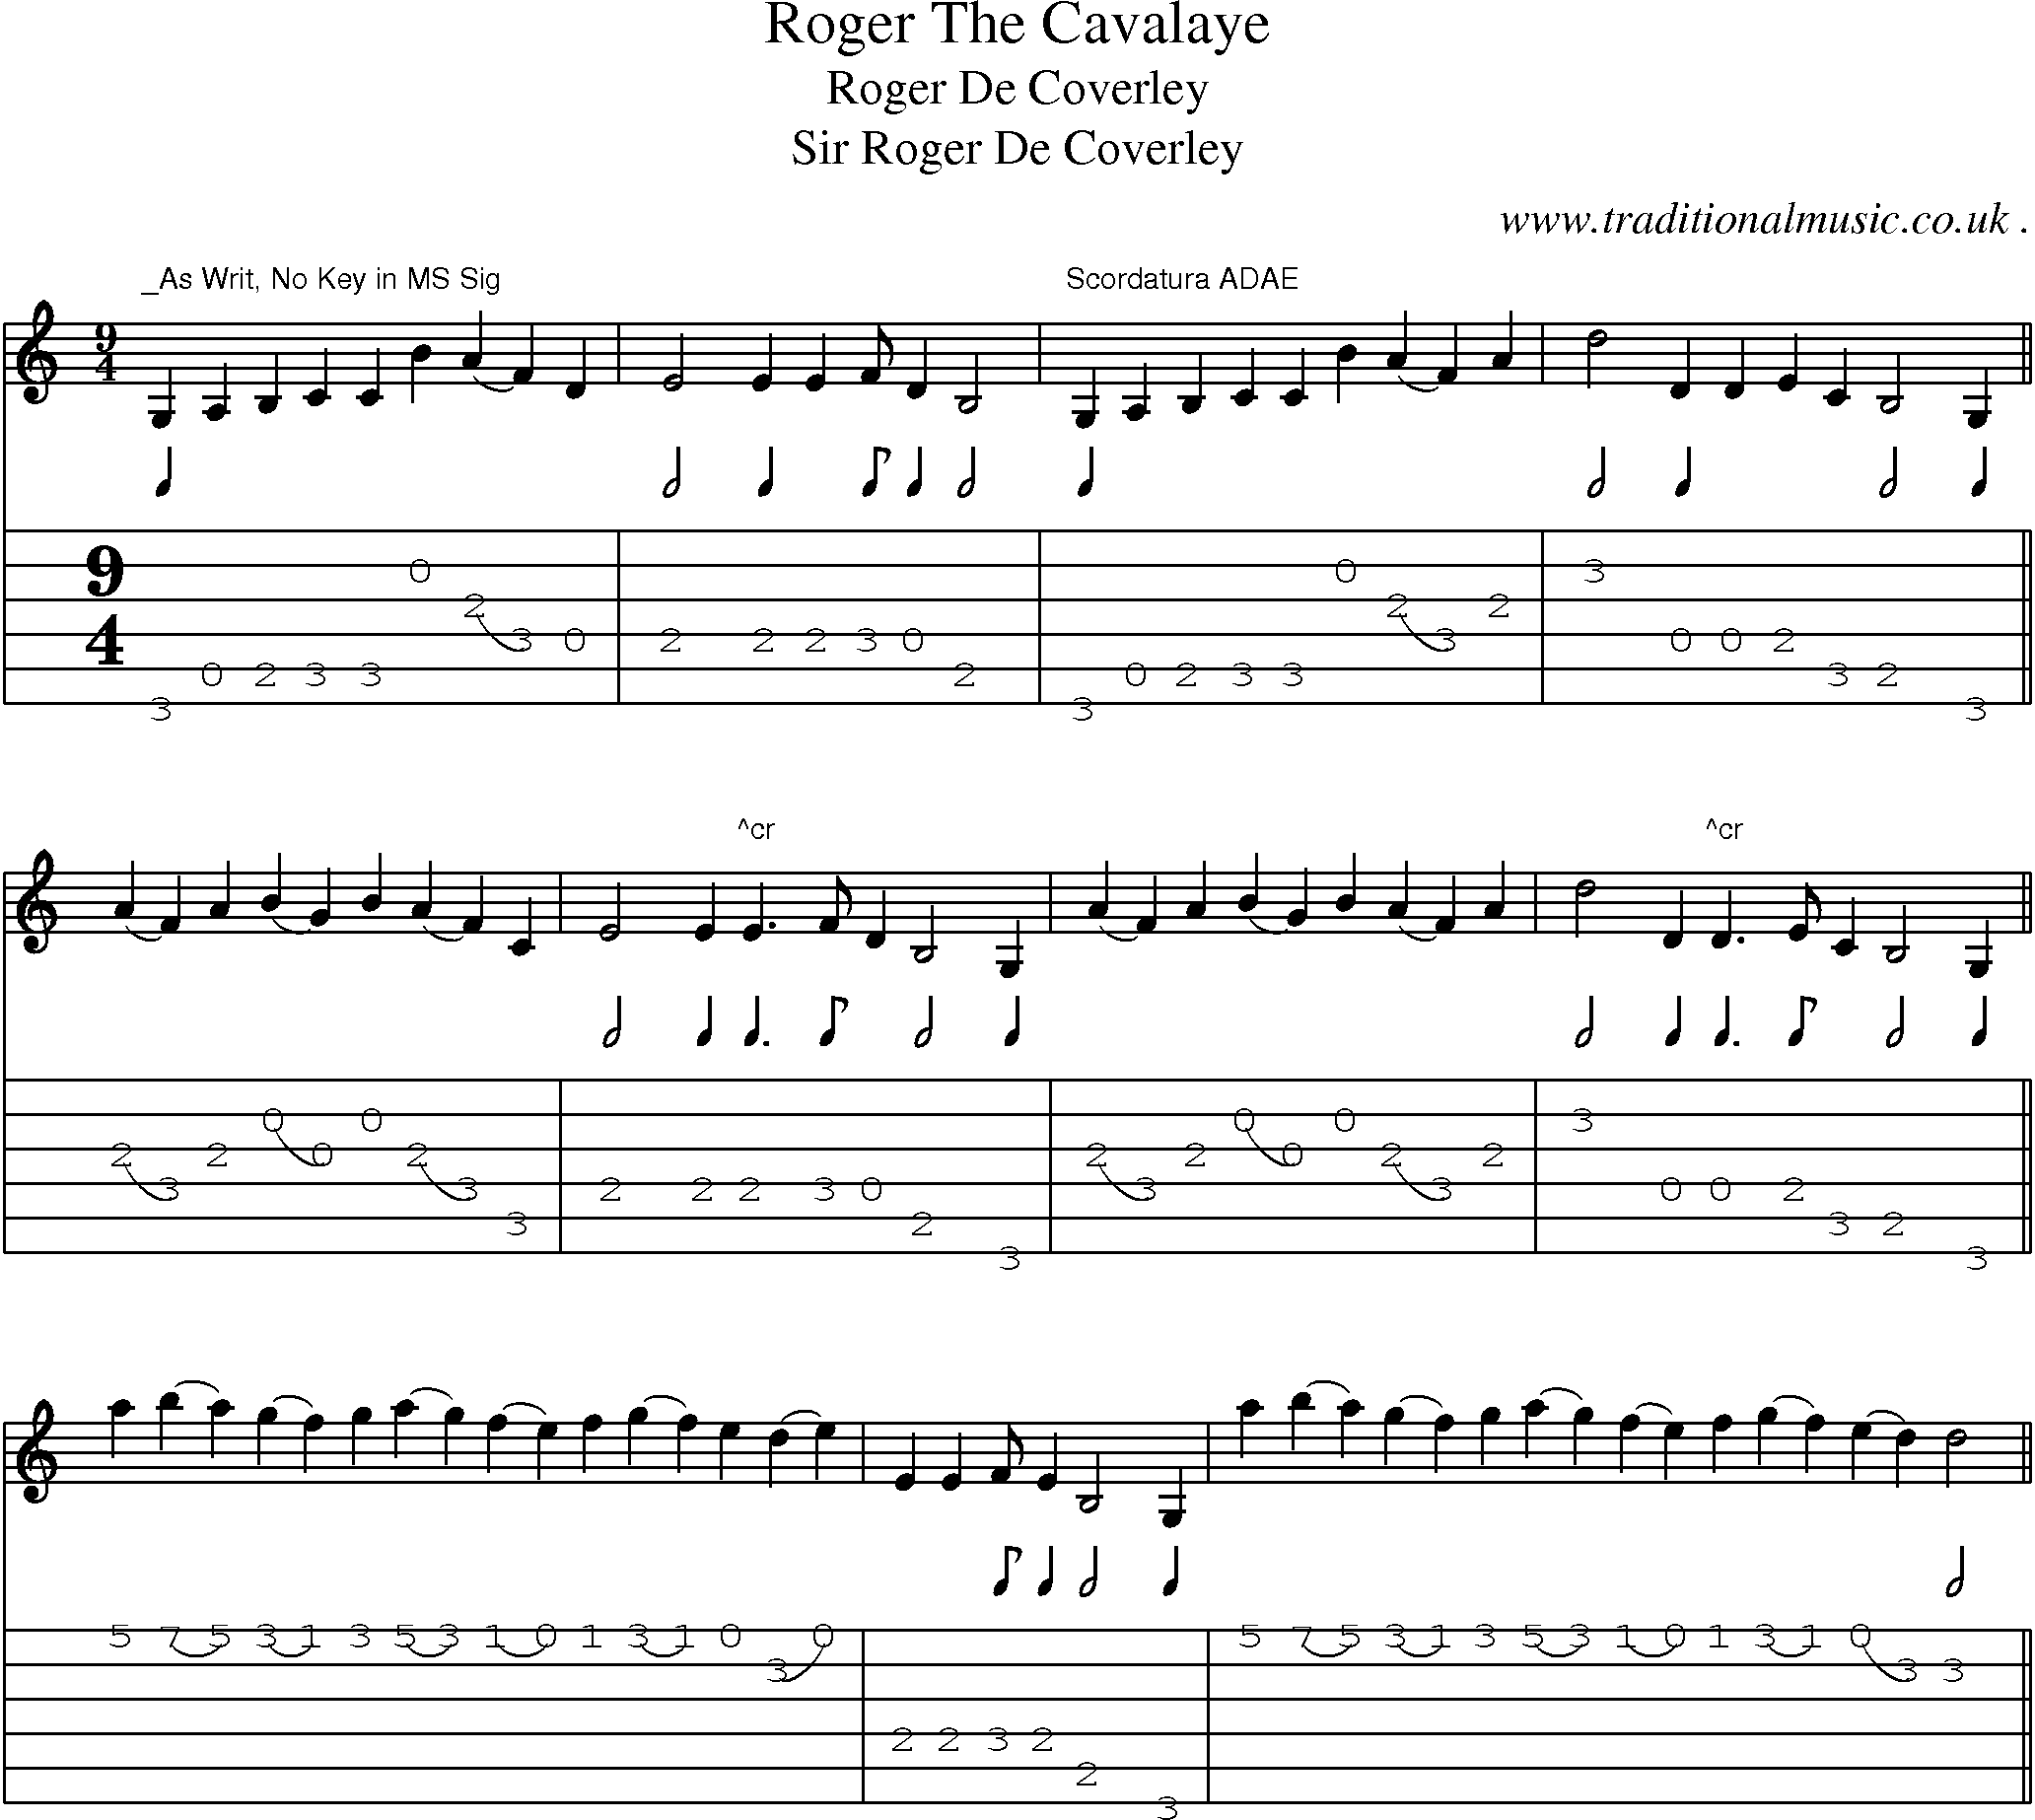 Sheet-Music and Guitar Tabs for Roger The Cavalaye